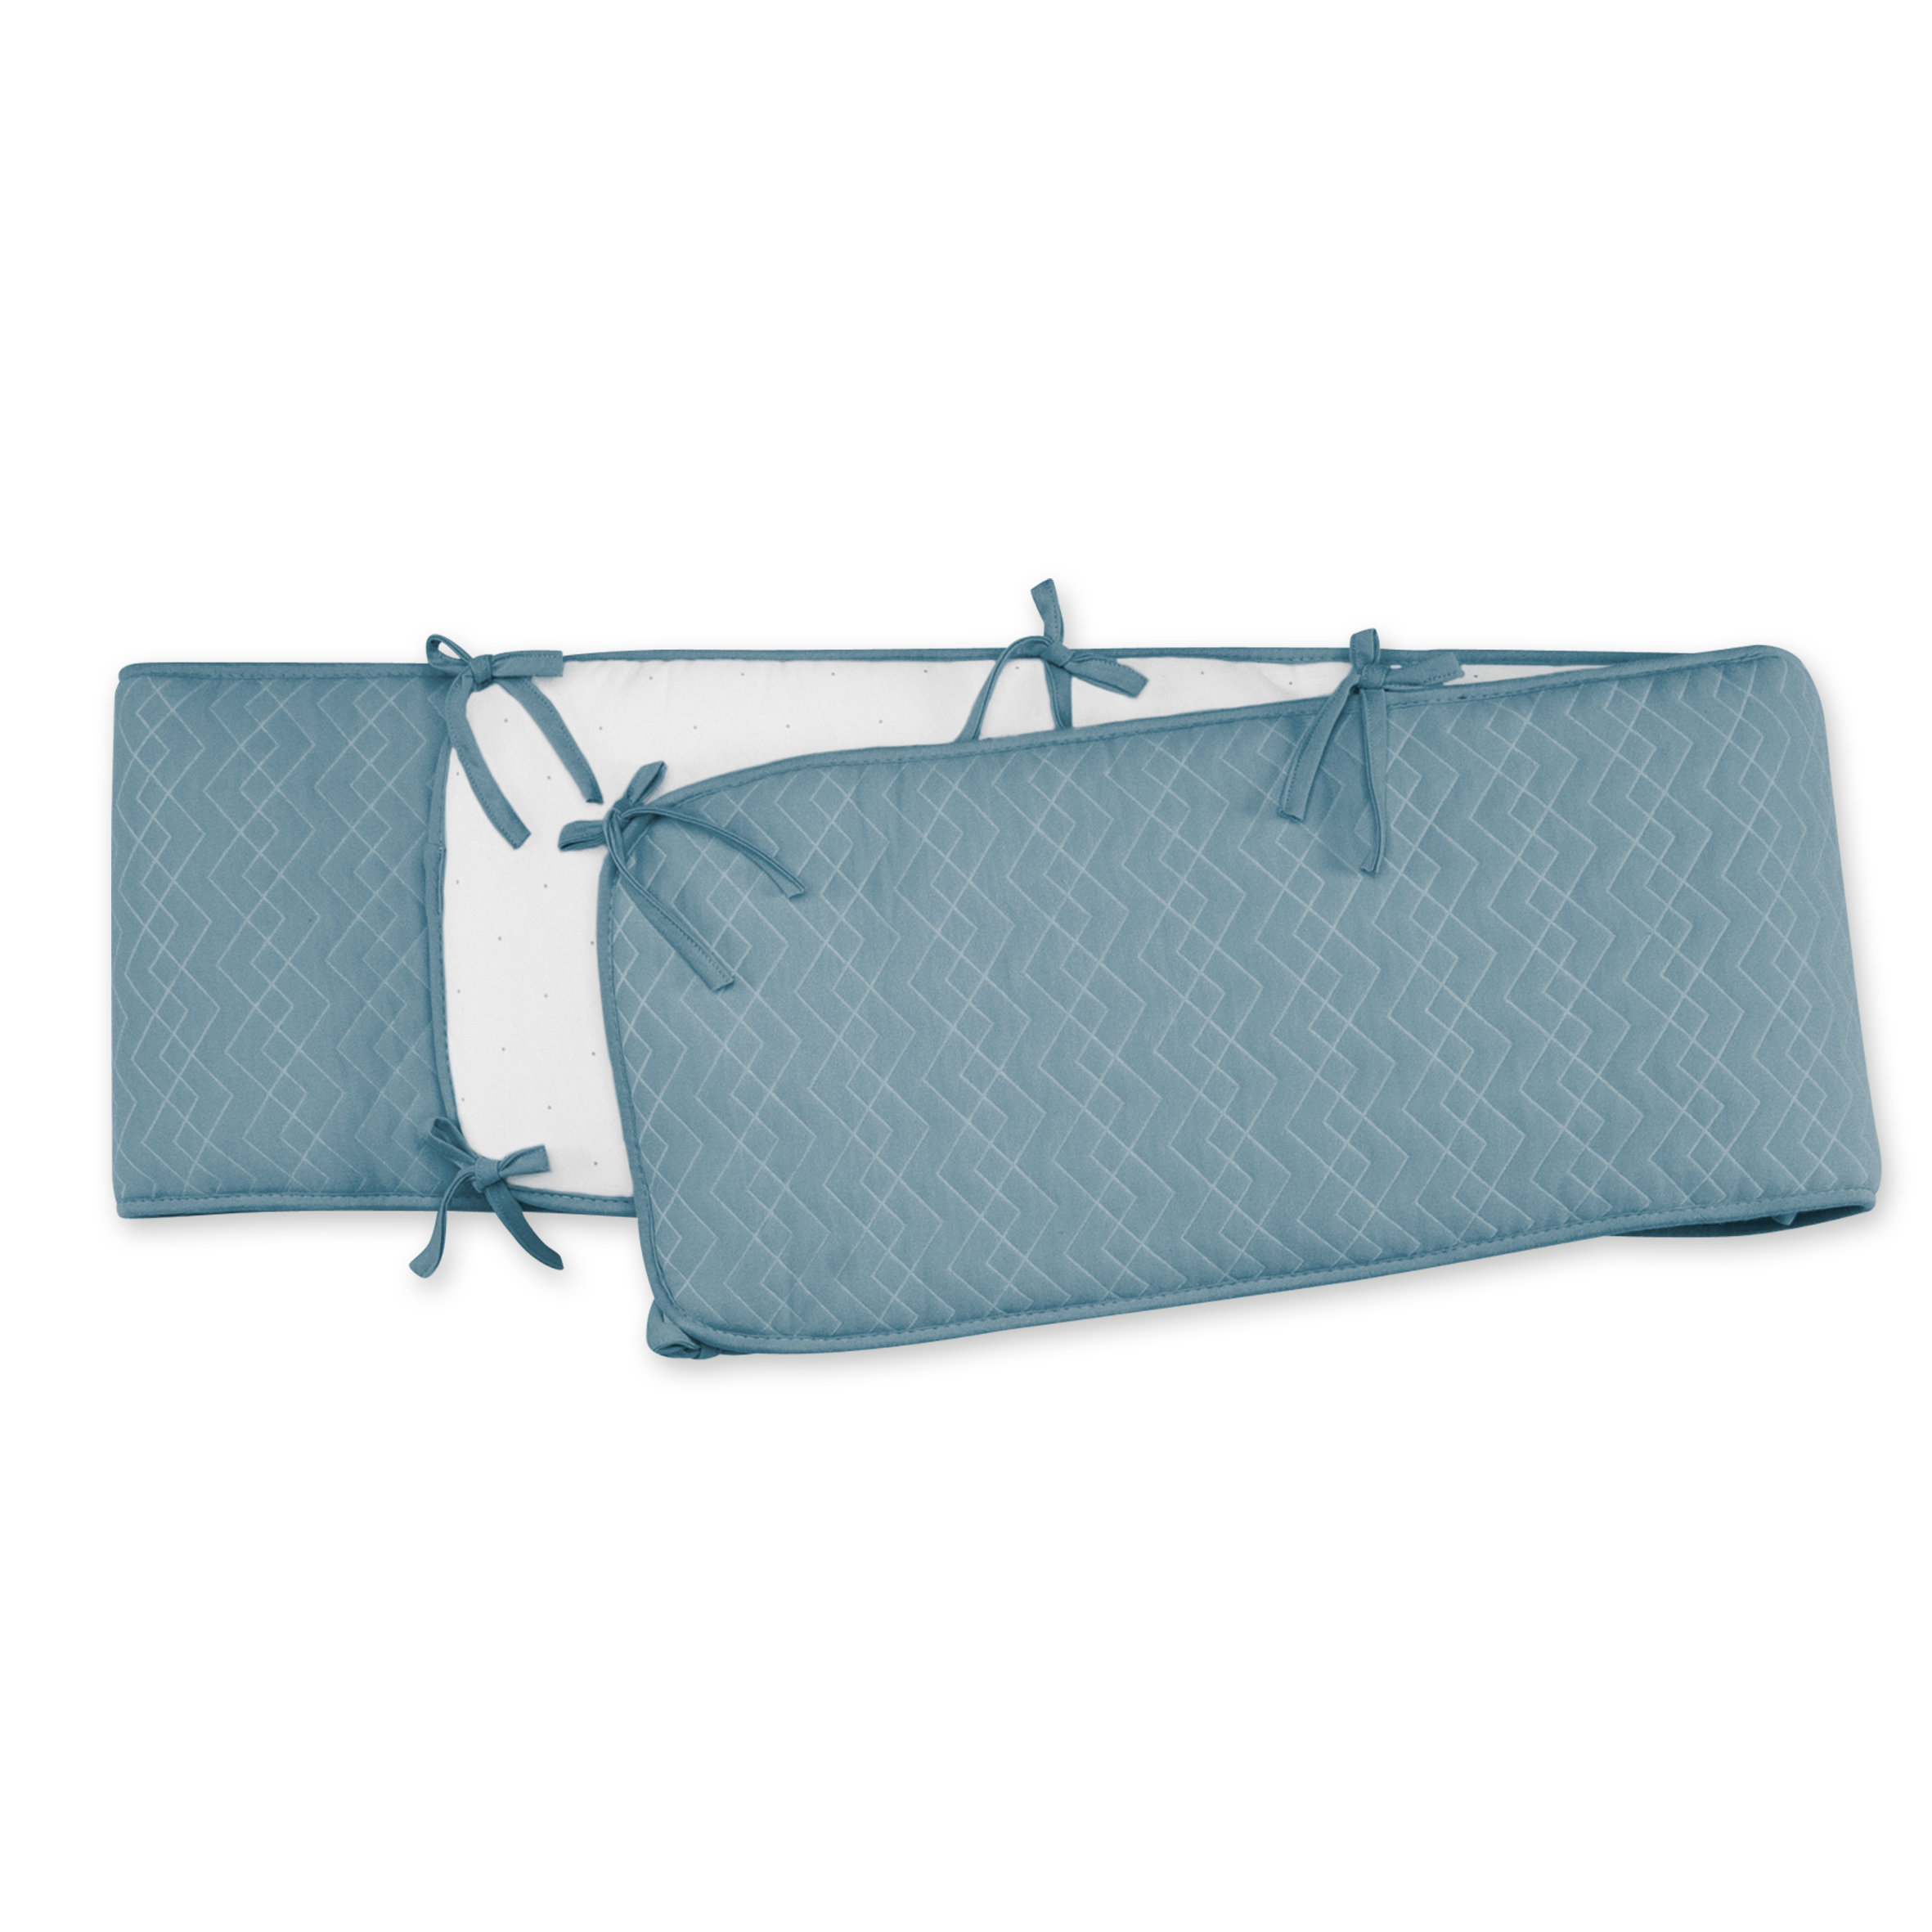 Playpen bumper Pady quilted jersey + jersey 100x100x28cm OSAKA Mineral blue